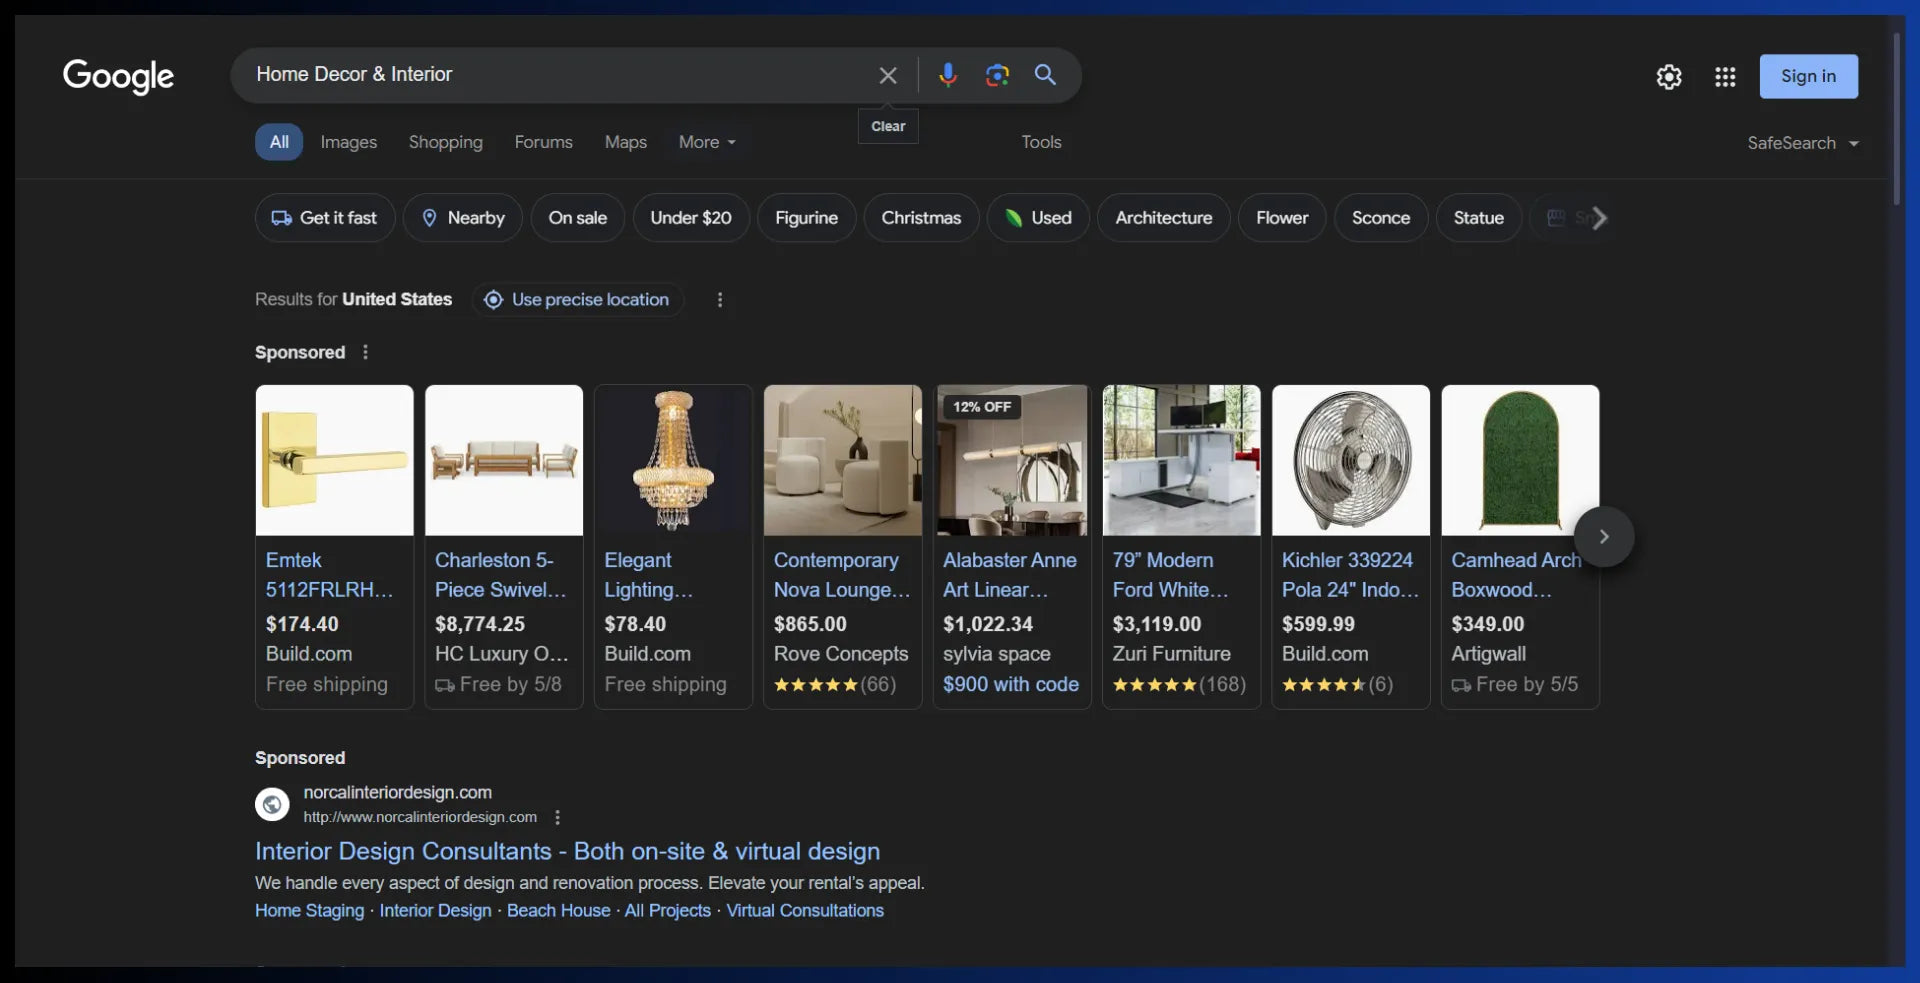 Google ads for home decor and interior products